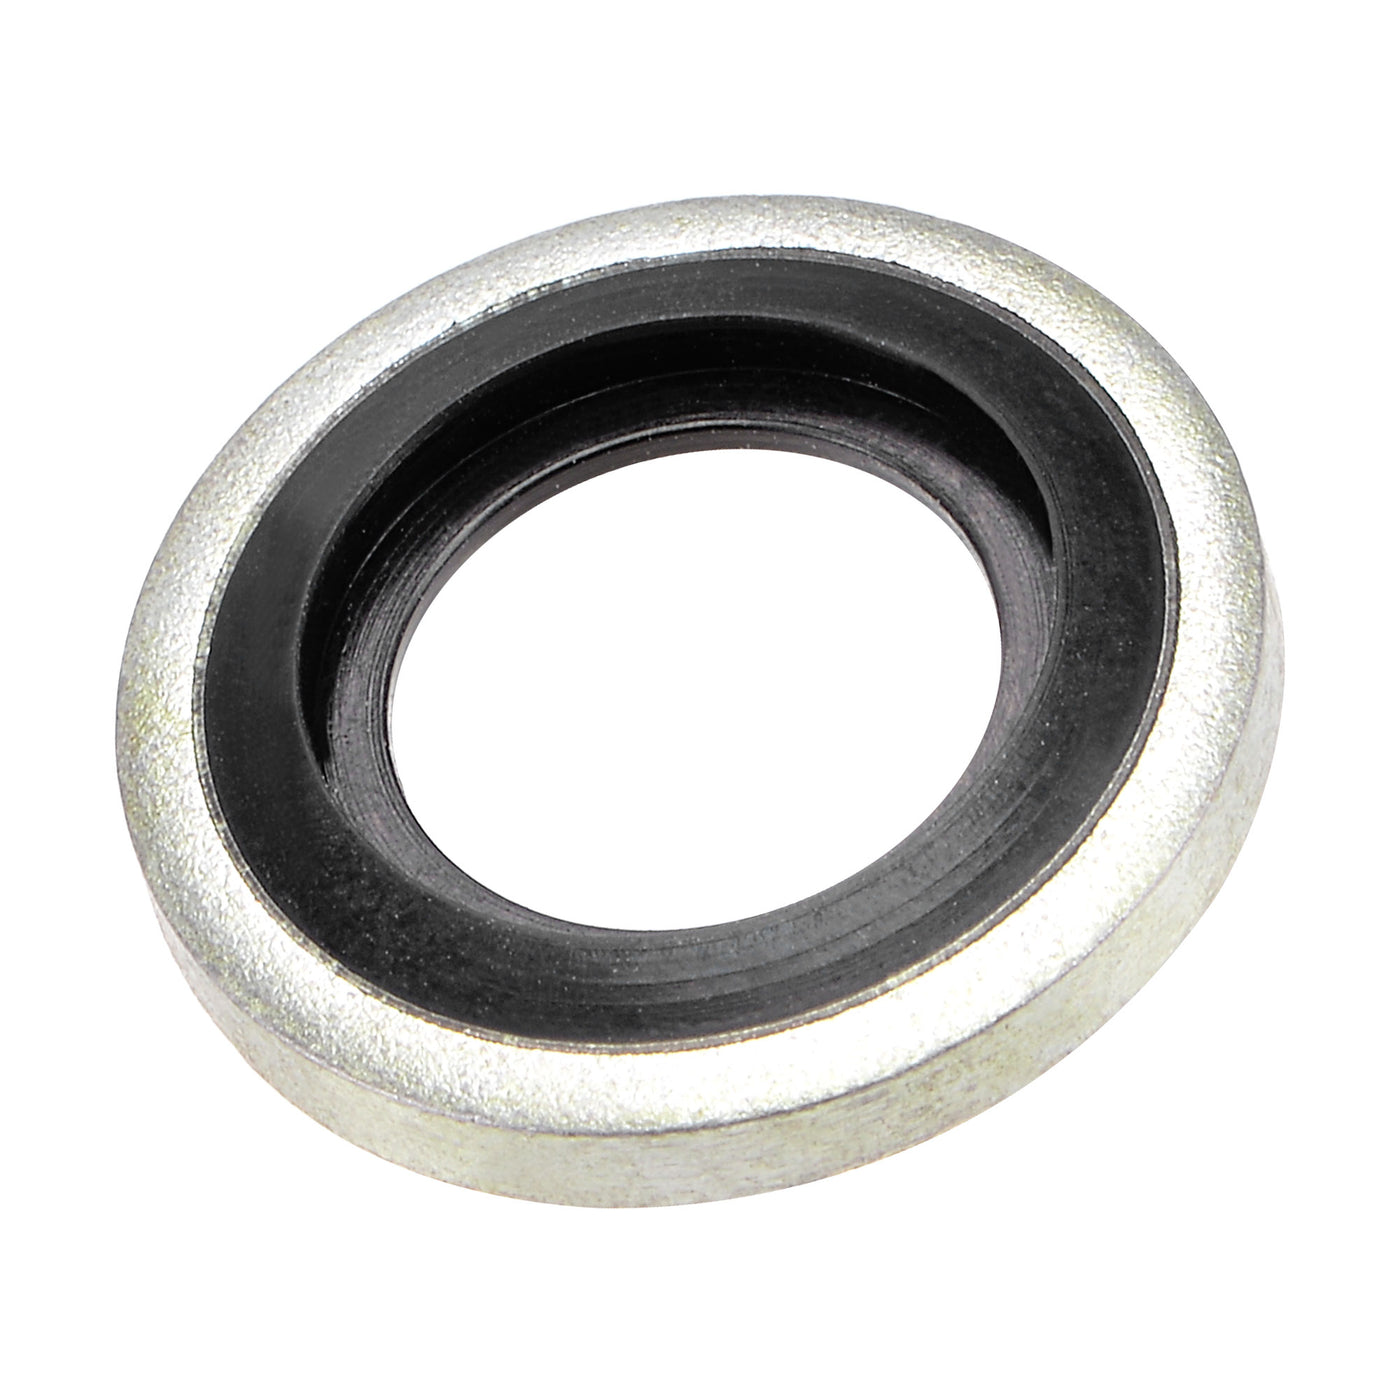 Harfington 50pcs Bonded Seal Washers G1/8 15.9x8.5x2.9mm Carbon Steel Nitrile Rubber Gasket